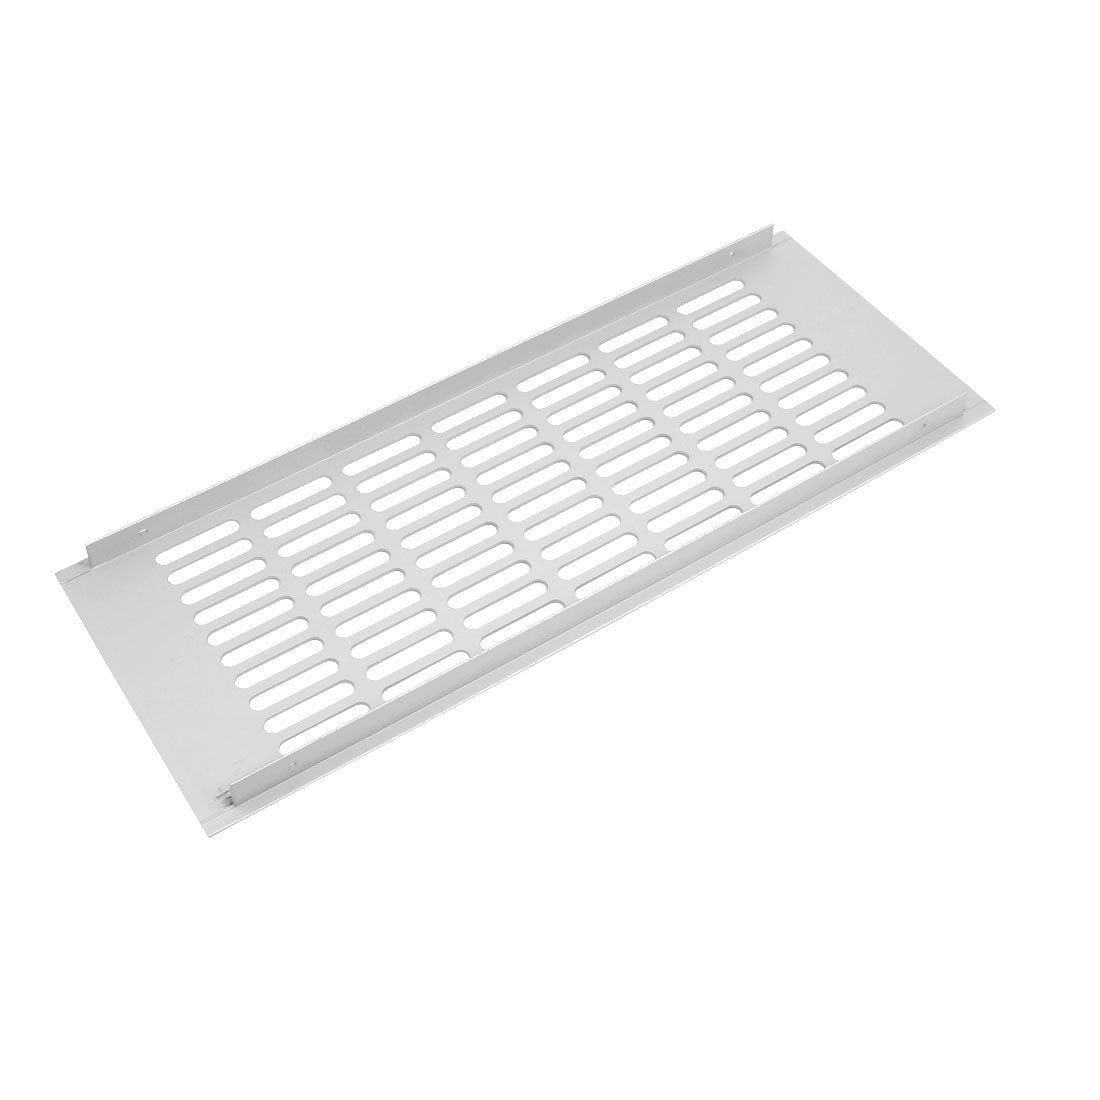 uxcell Uxcell 2pcs 400mmx150mm Aluminum Alloy Air Vent Louvered Grill Cover Ventilation Grille